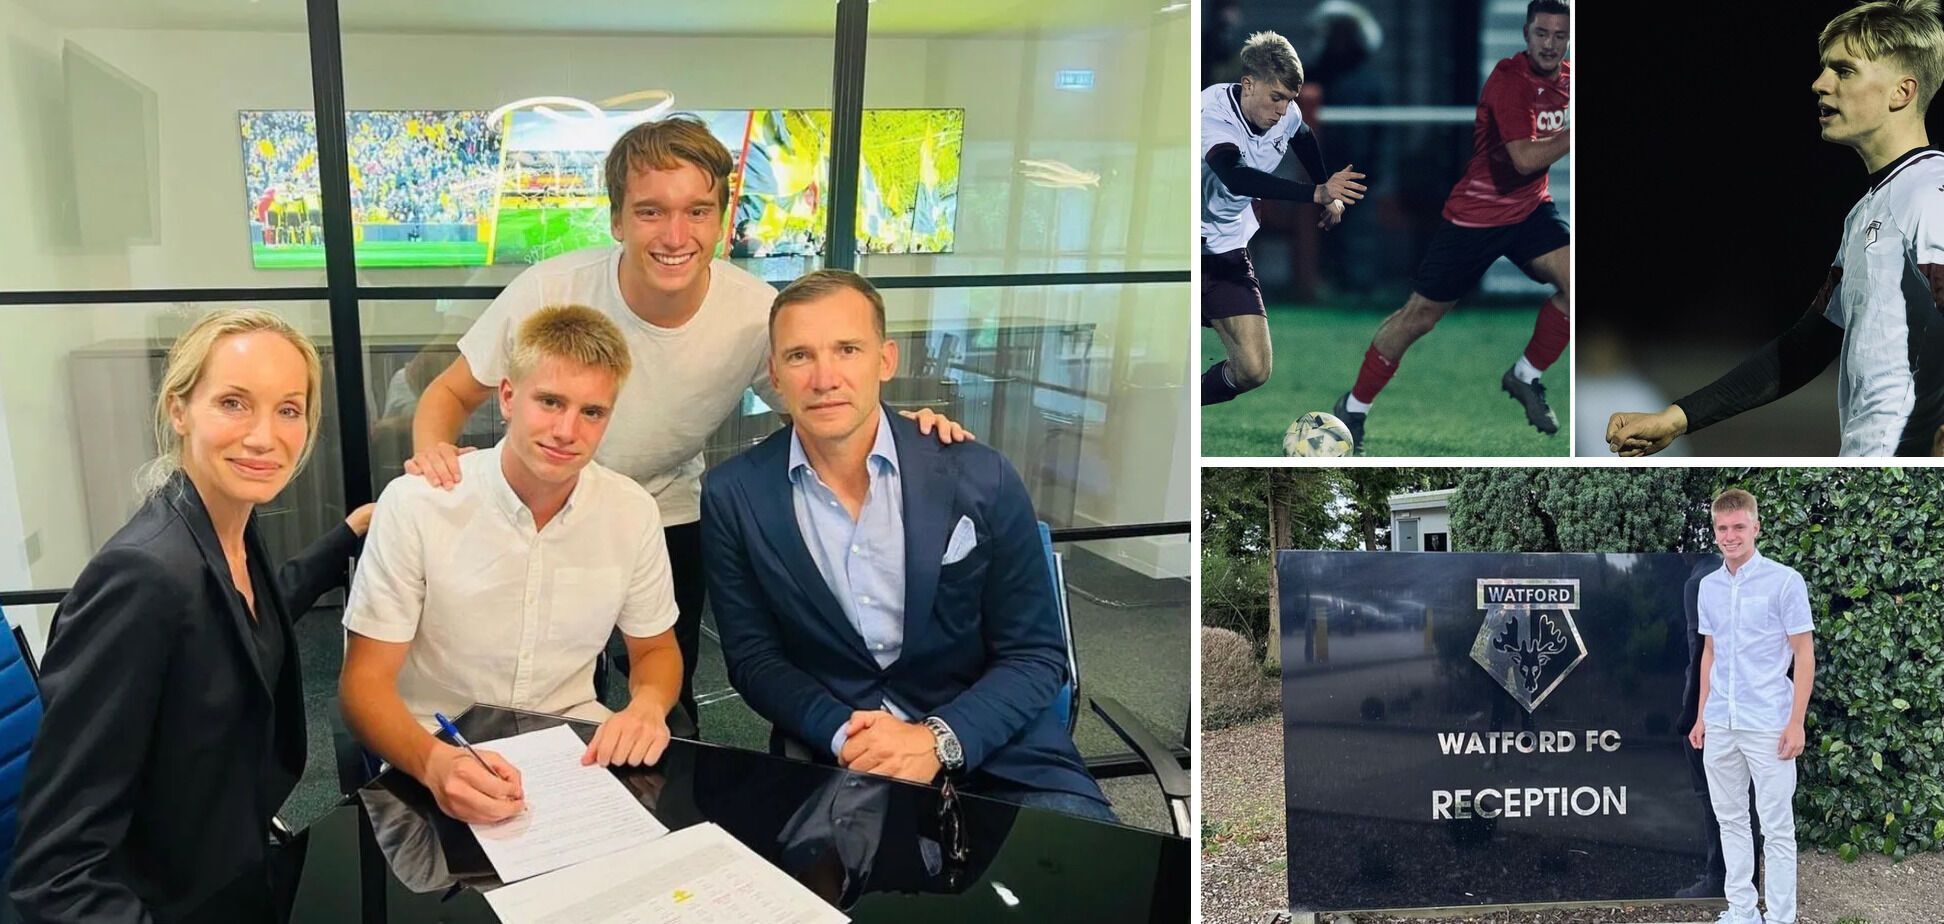 He has already submitted the documents. The media have revealed what citizenship Andriy Shevchenko's son will receive